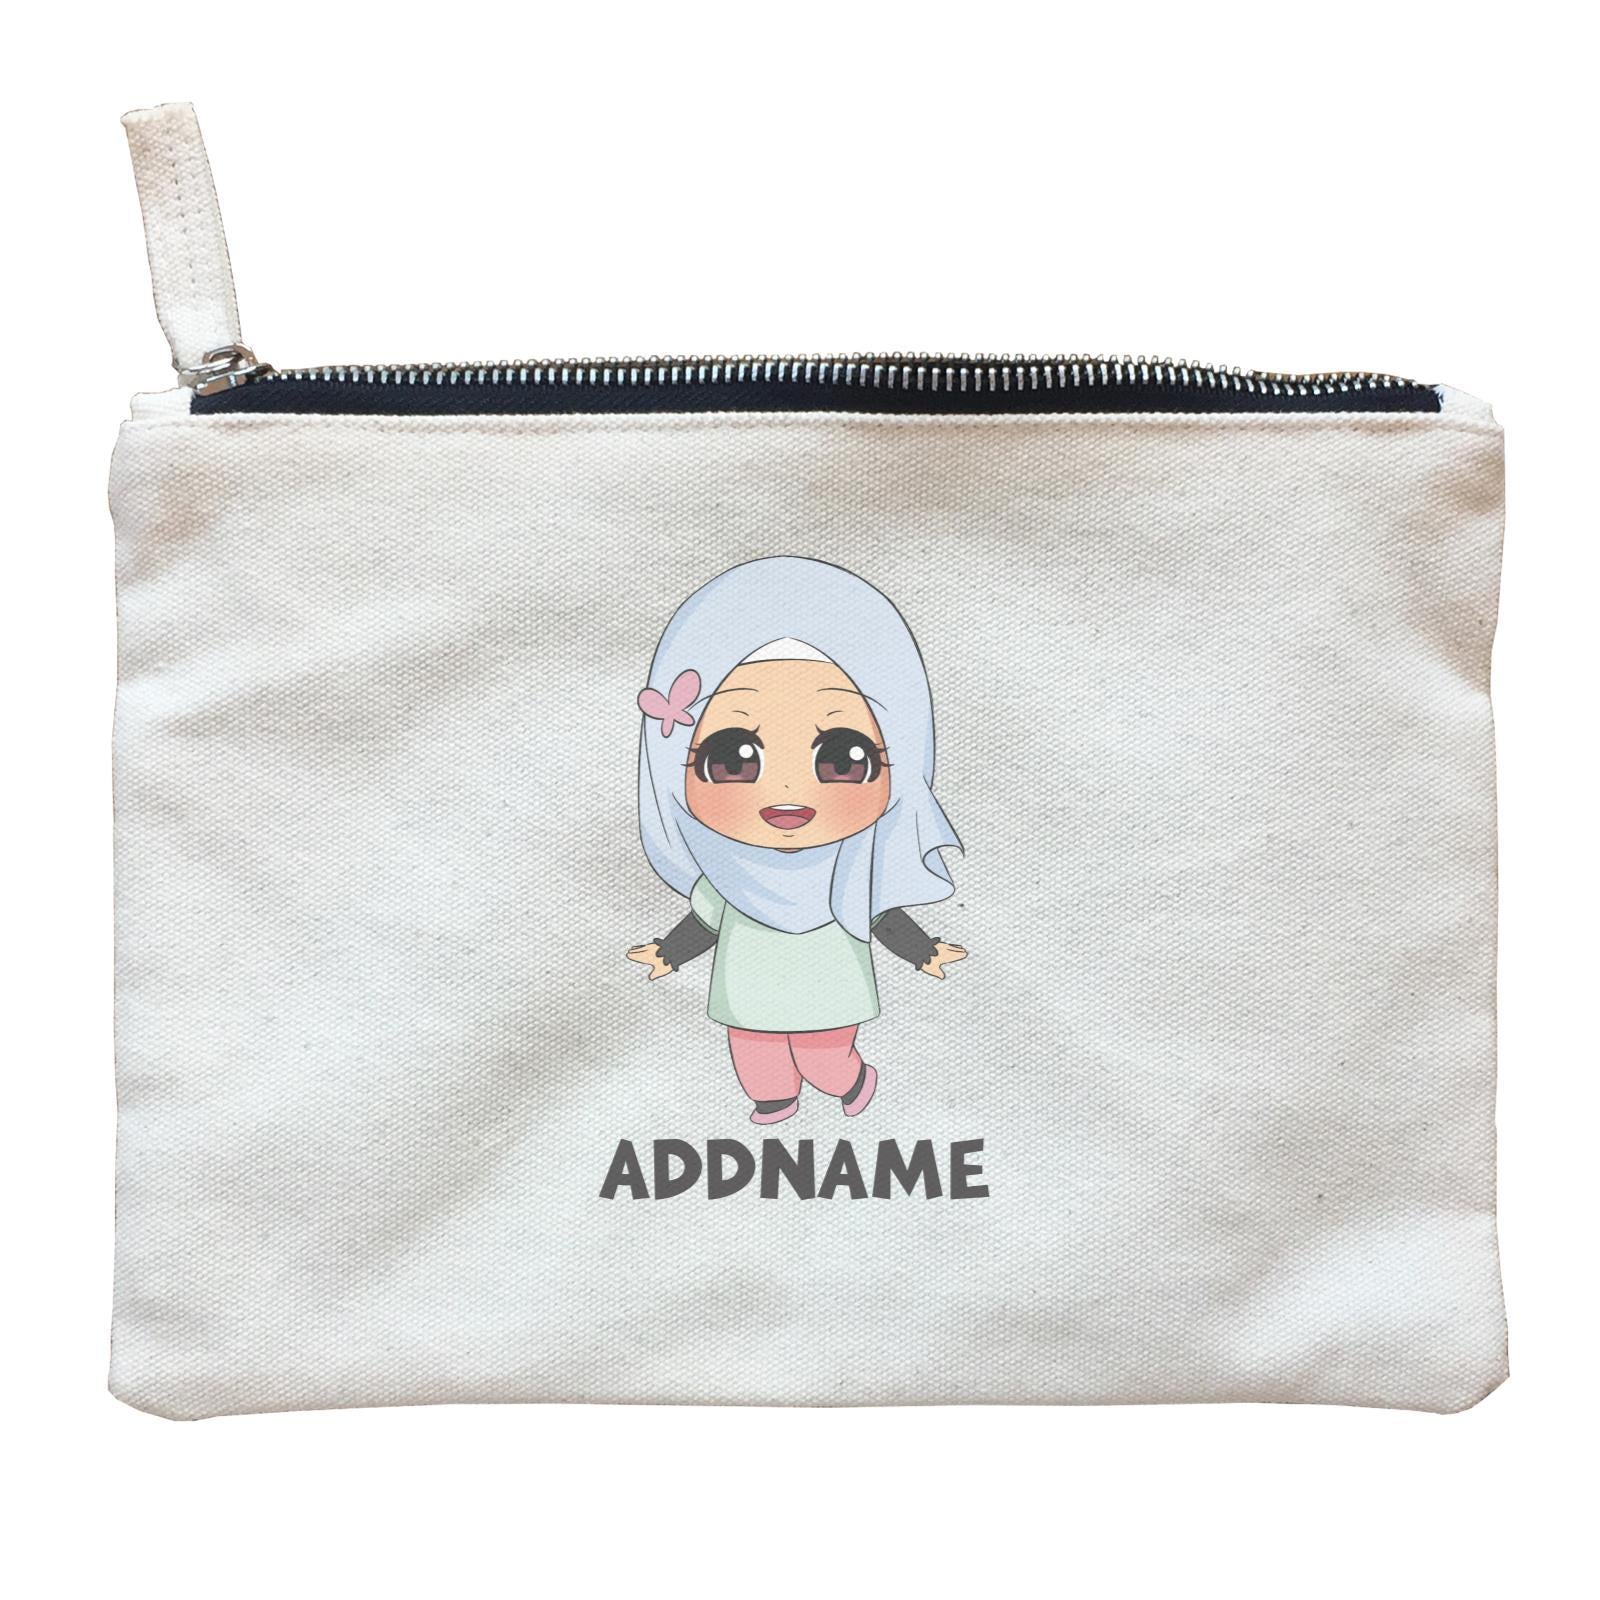 Children's Day Gift Series Little Malay Girl Addname  Zipper Pouch